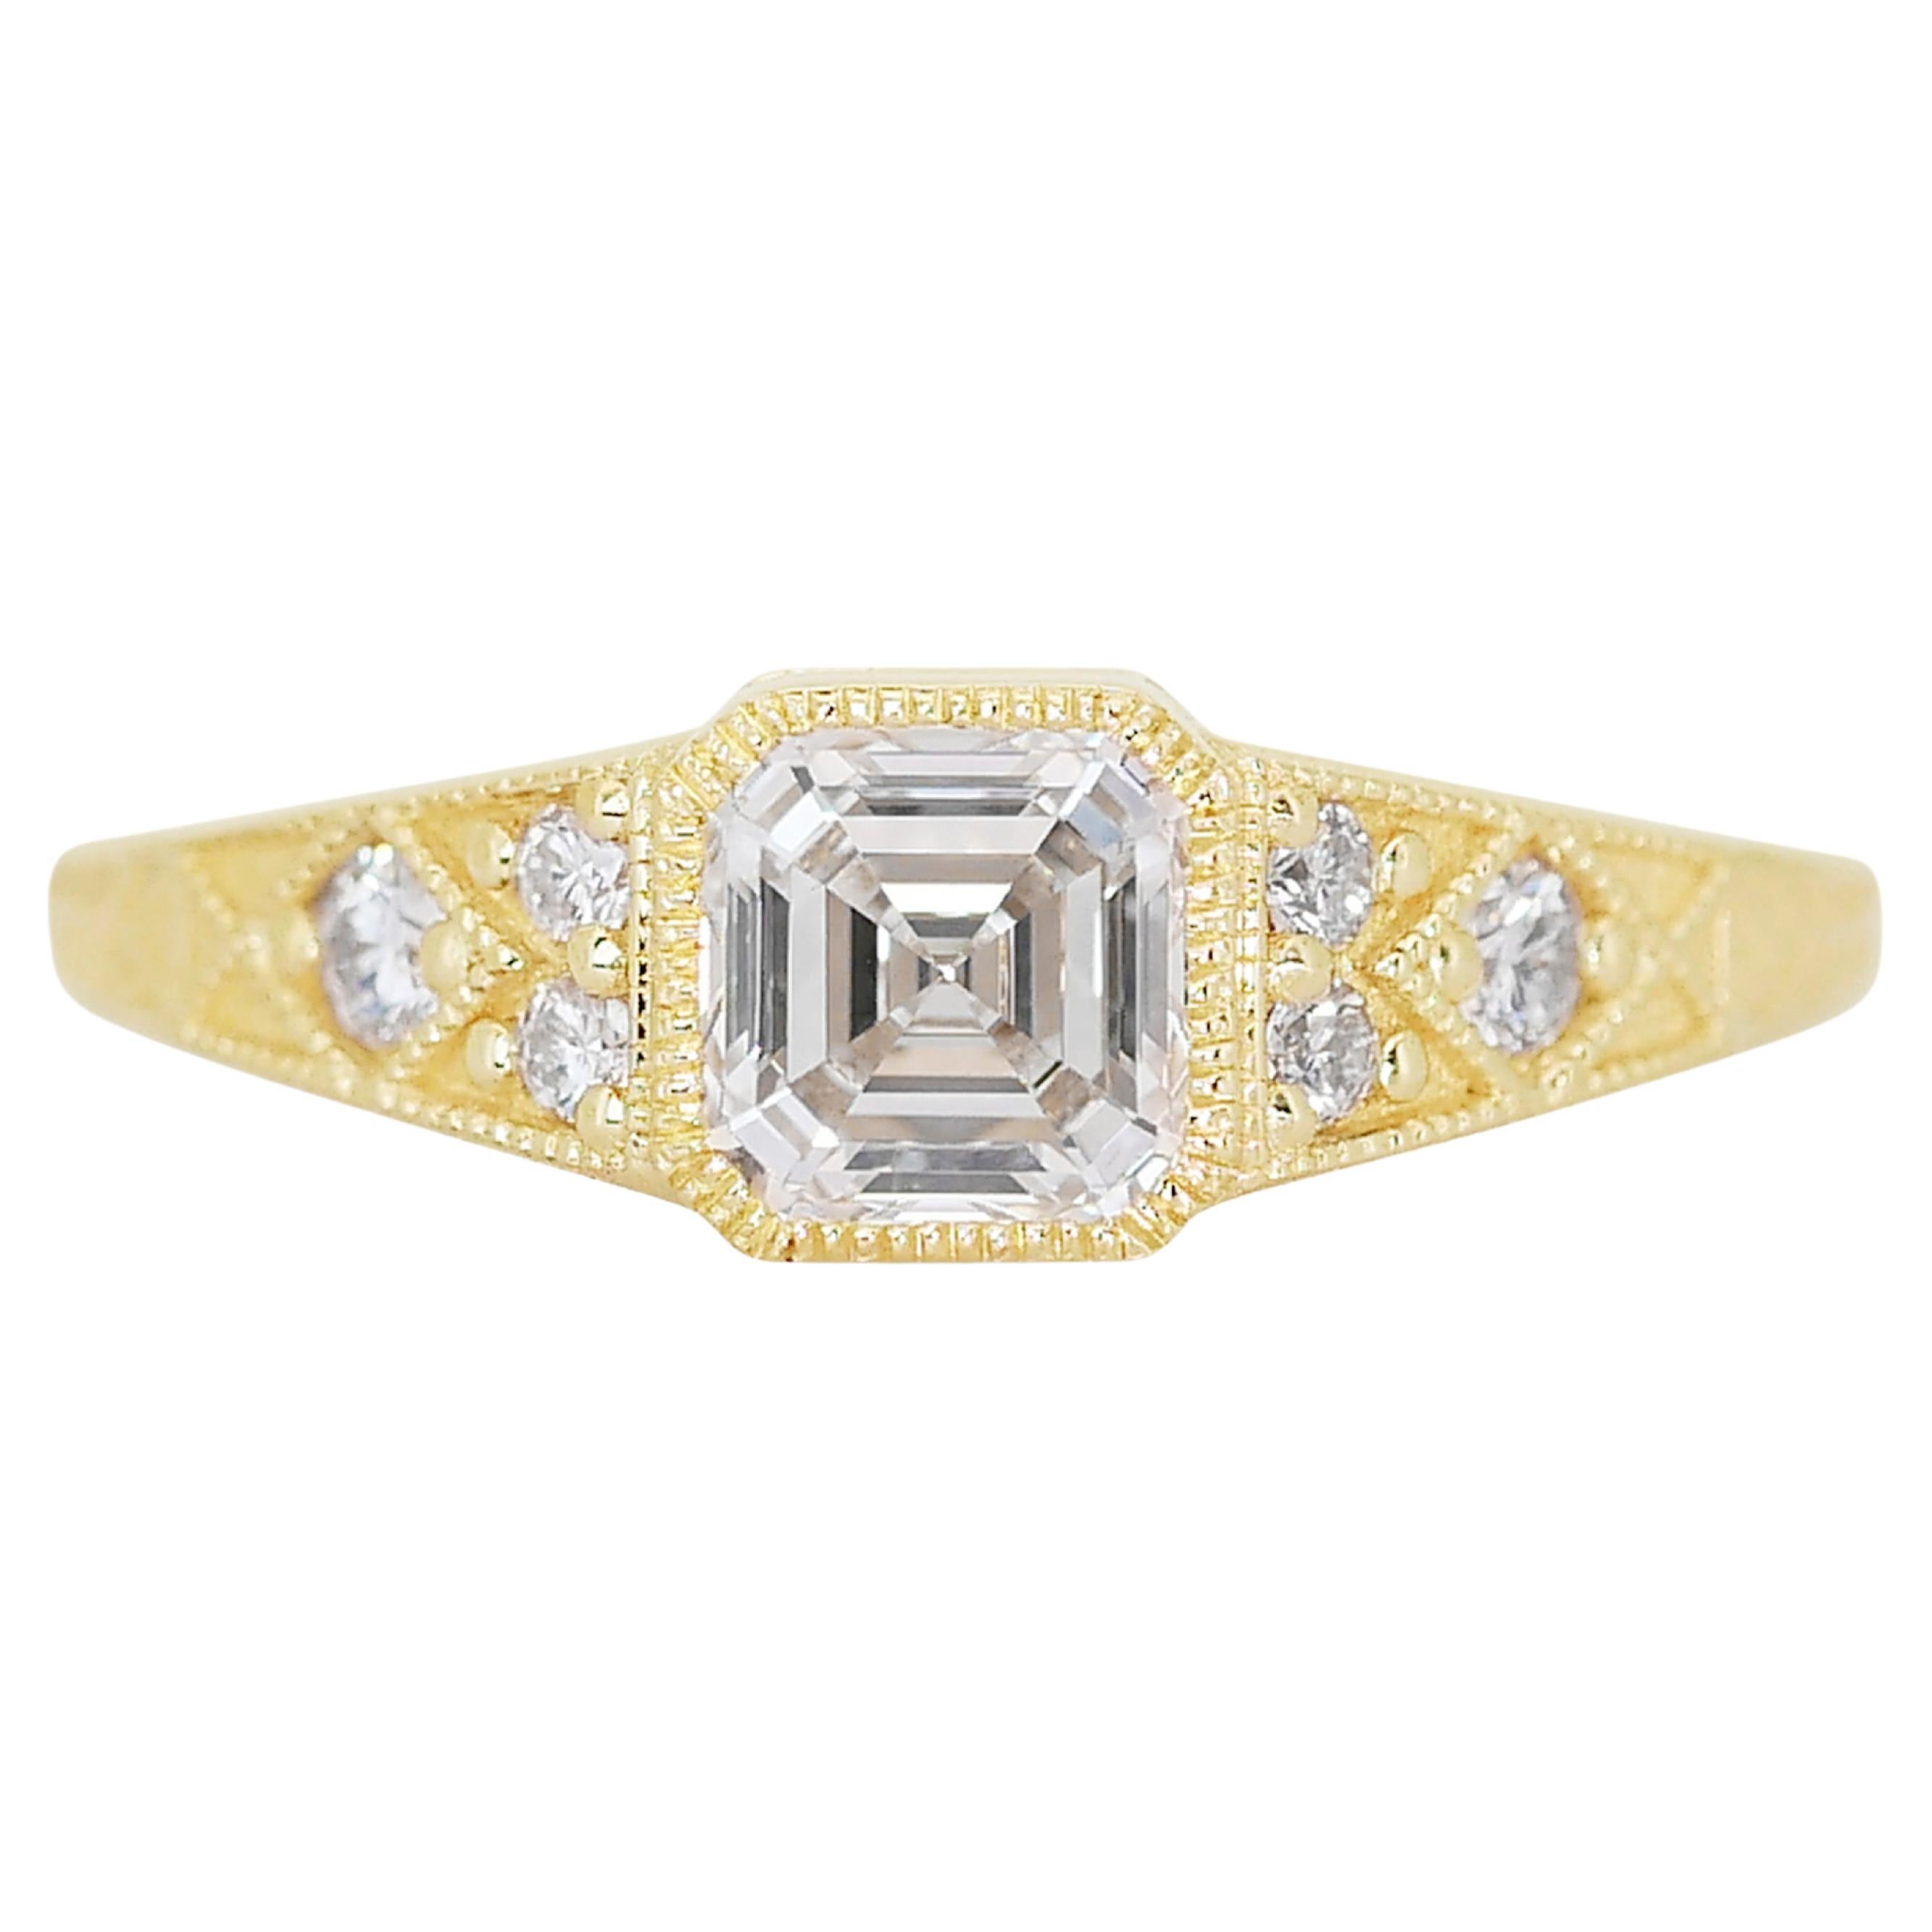 Beautiful 1.17ct Diamonds Pave Ring in 18k Yellow Gold - GIA Certified For Sale